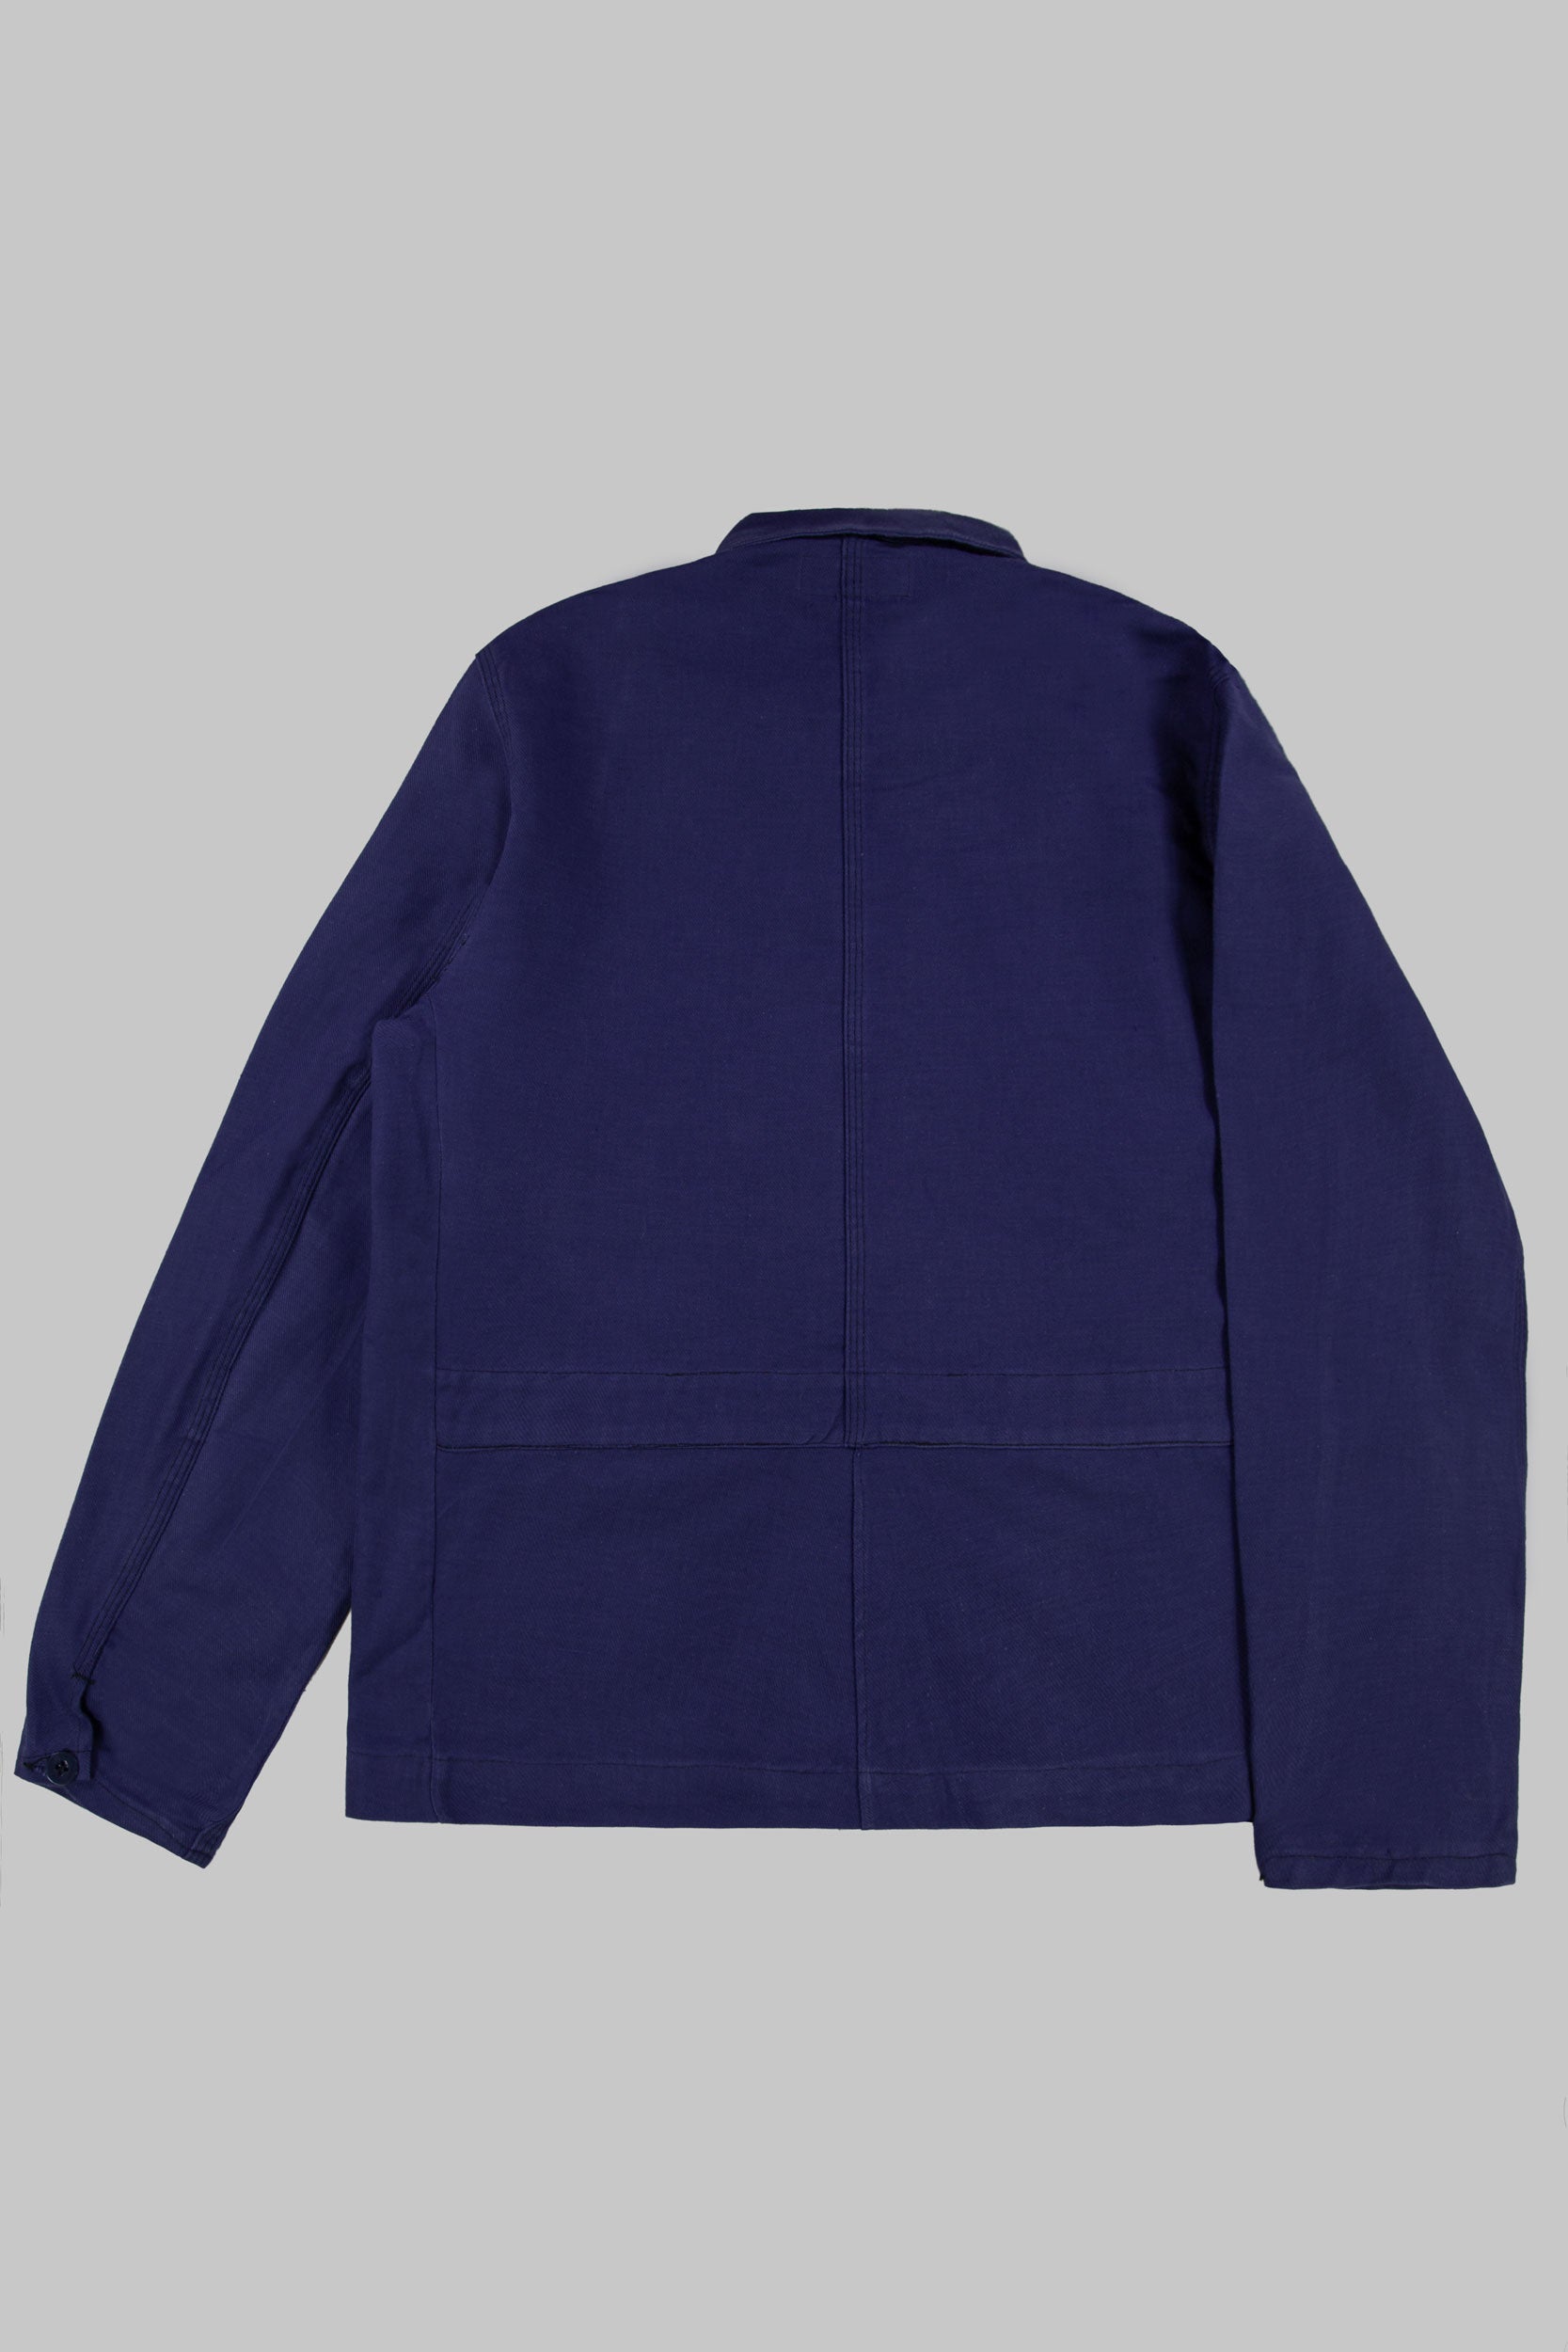 Scandi Coverall Jacket Works Blue